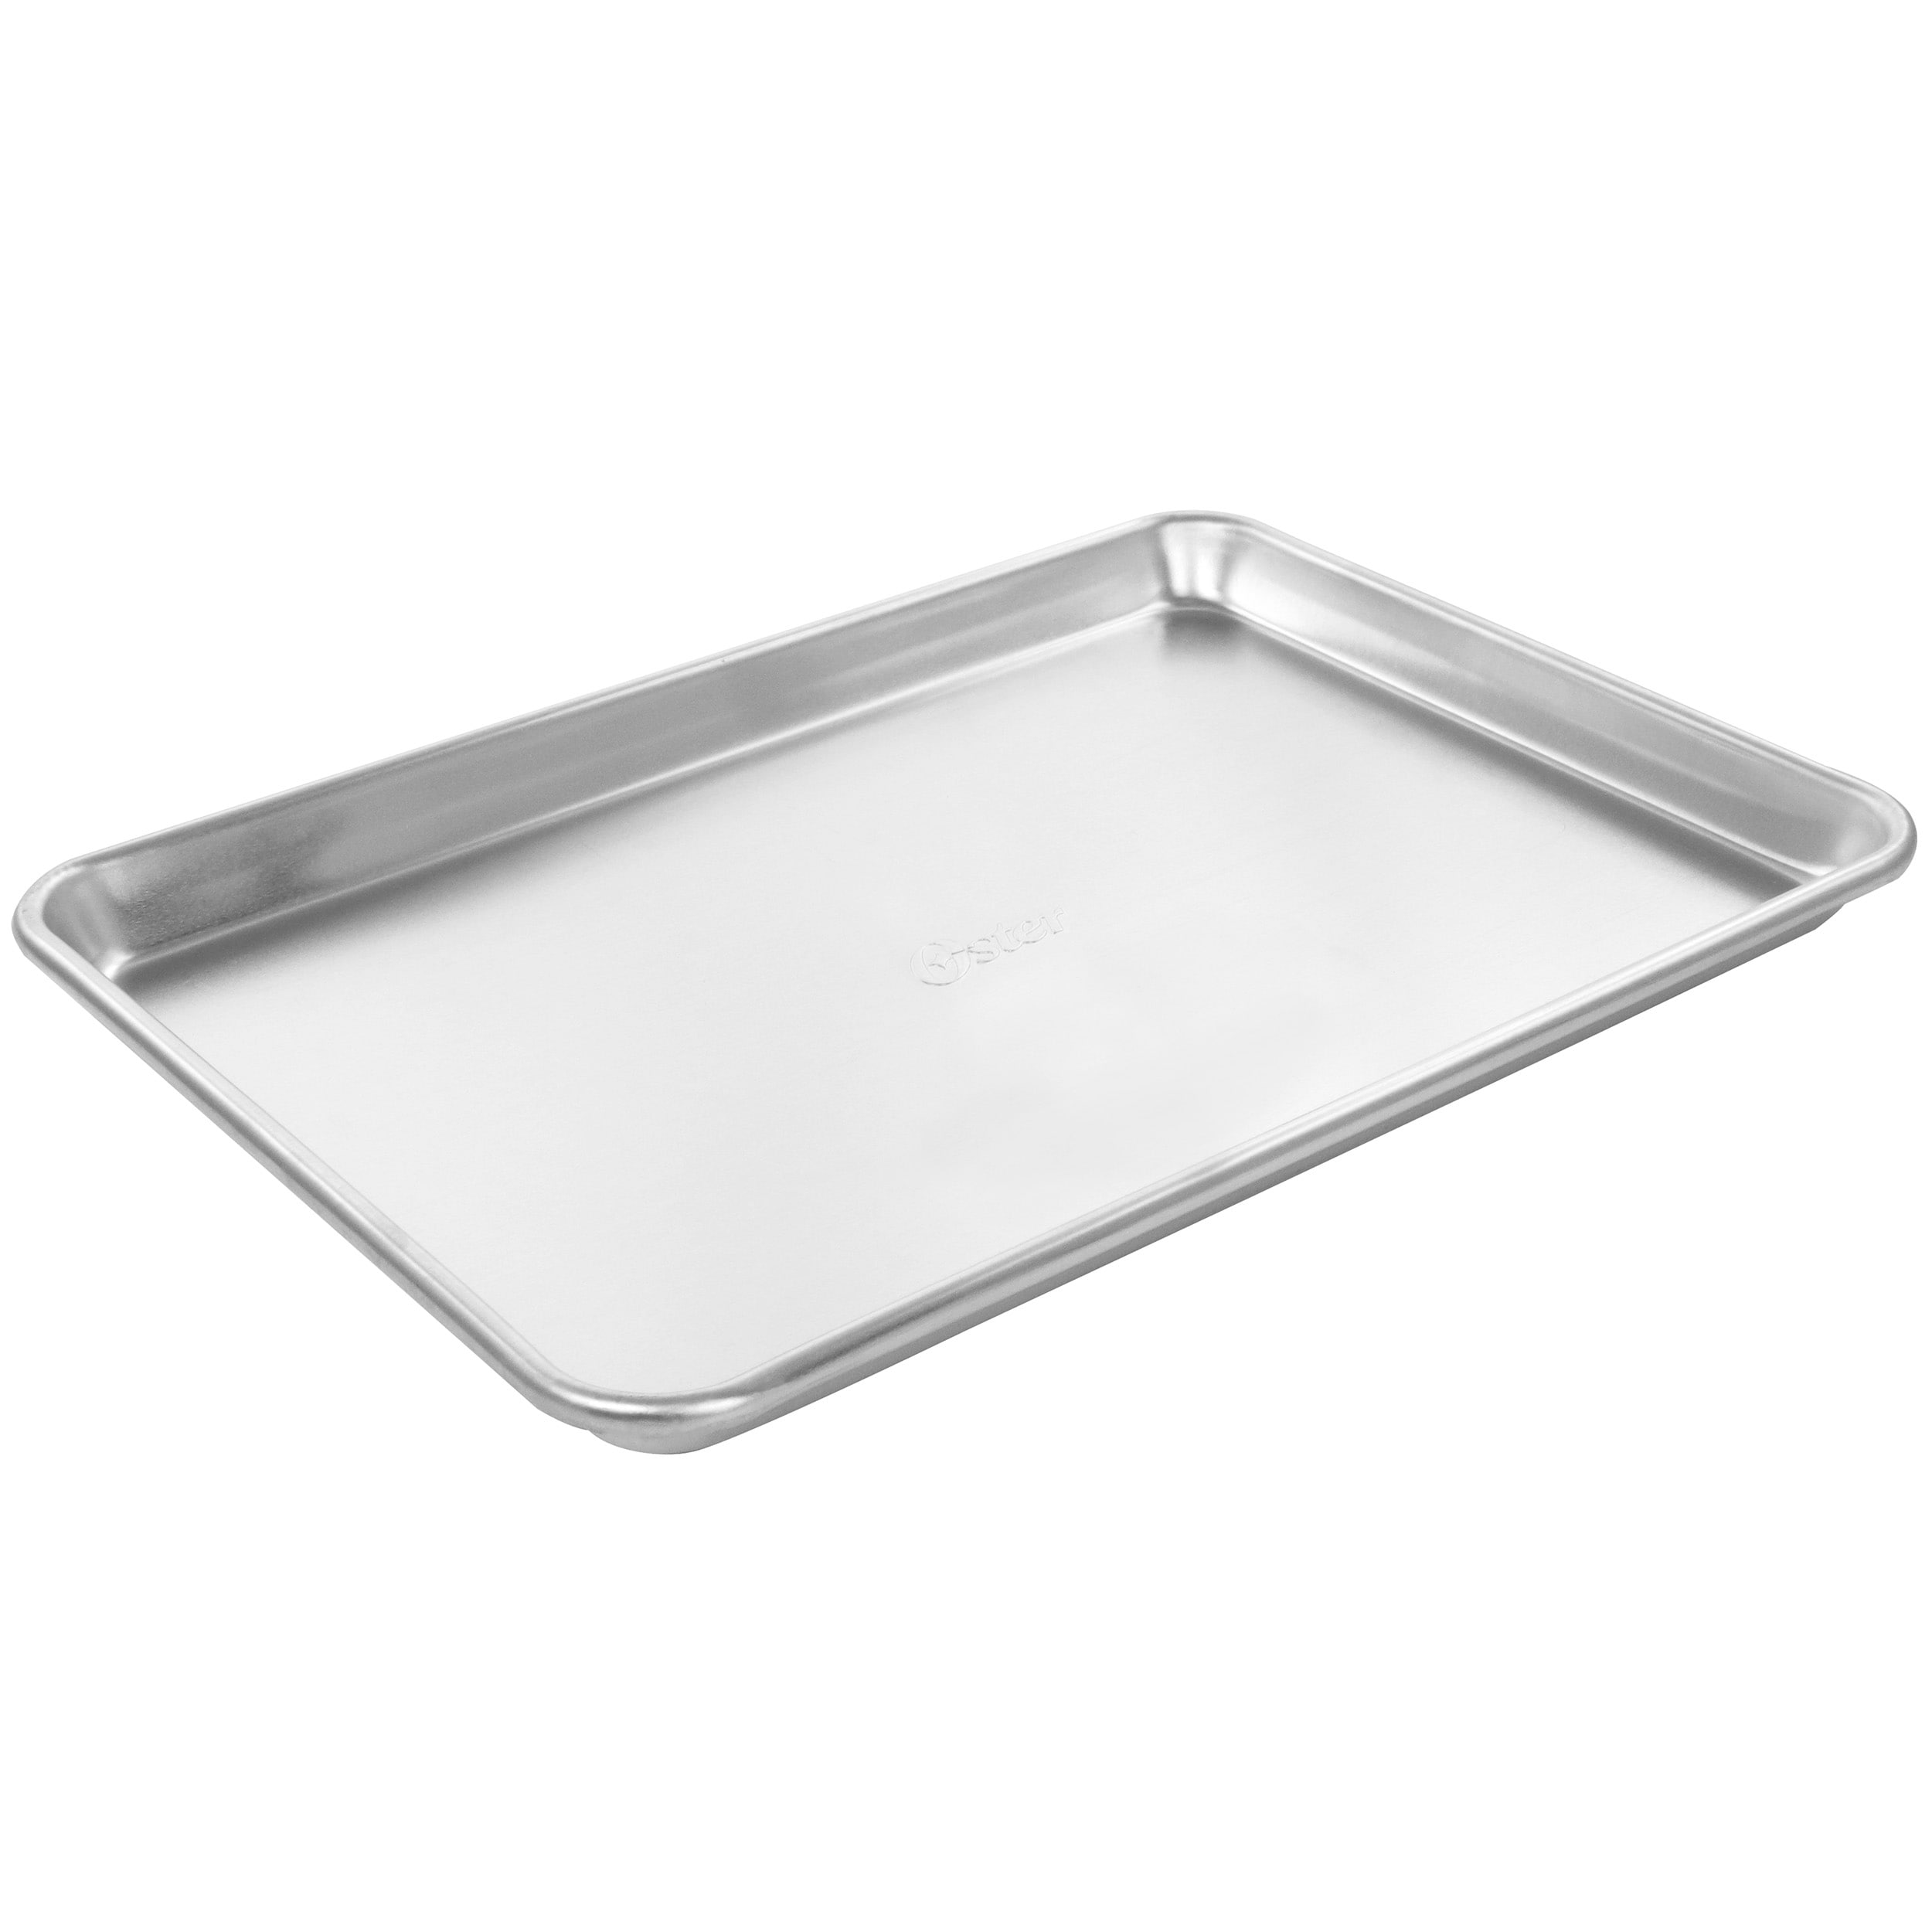 15 x 10.5 Inch Aluminum Jelly Roll Pan - On Sale - Bed Bath & Beyond -  37452722